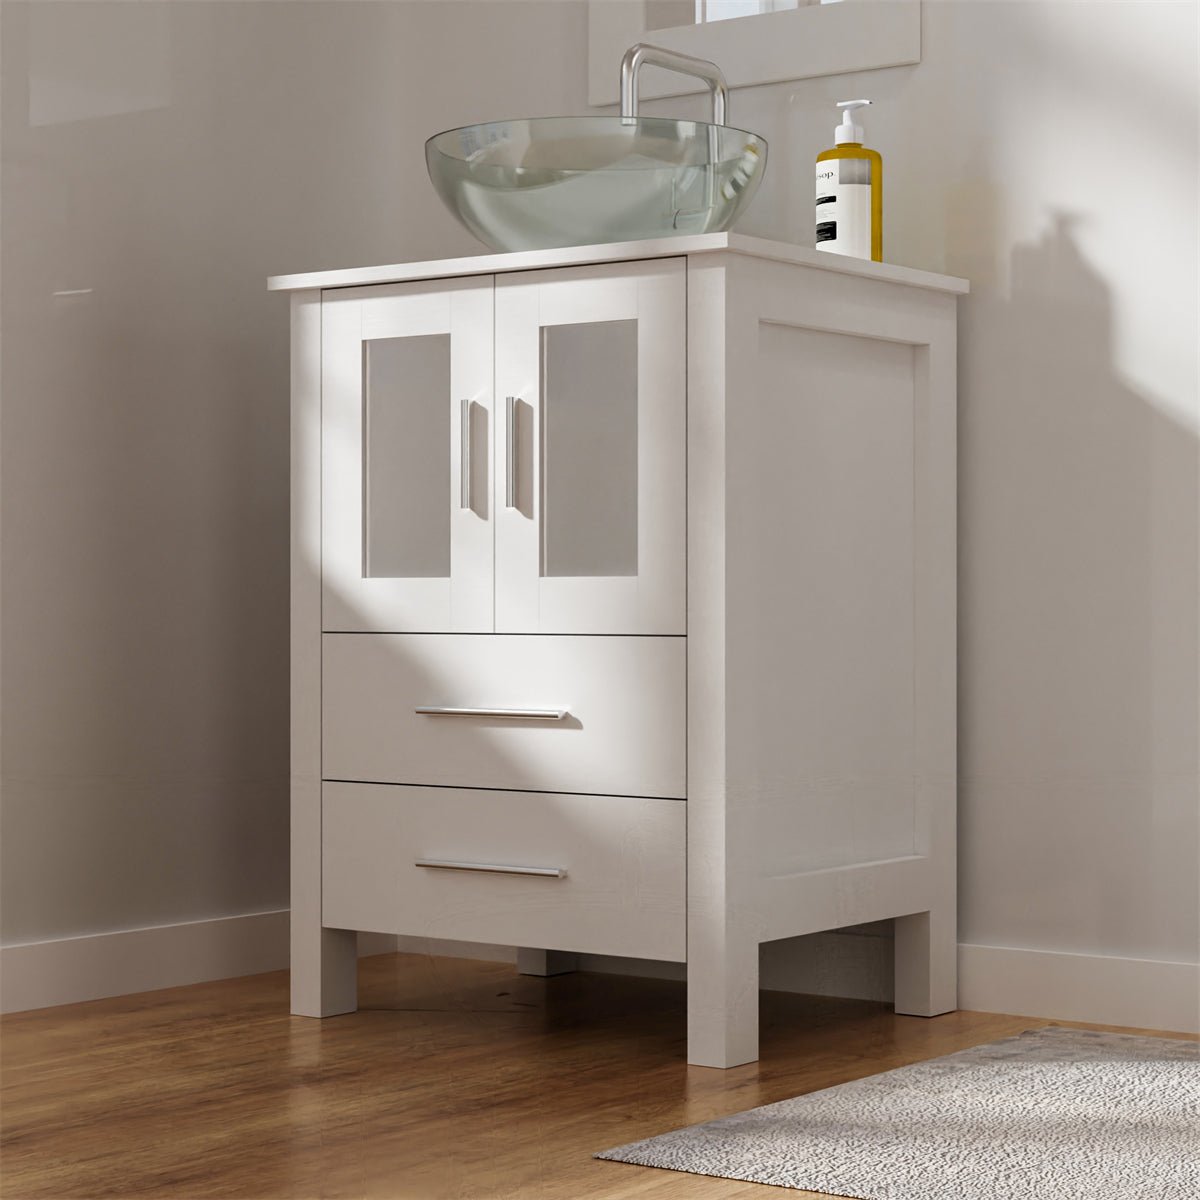 Exbrite 24 in.W x 19 in.D x 32.3 in.H White Wooden Minimalist Bathroom Cabinet Vanity with Mirrors,Two Floor